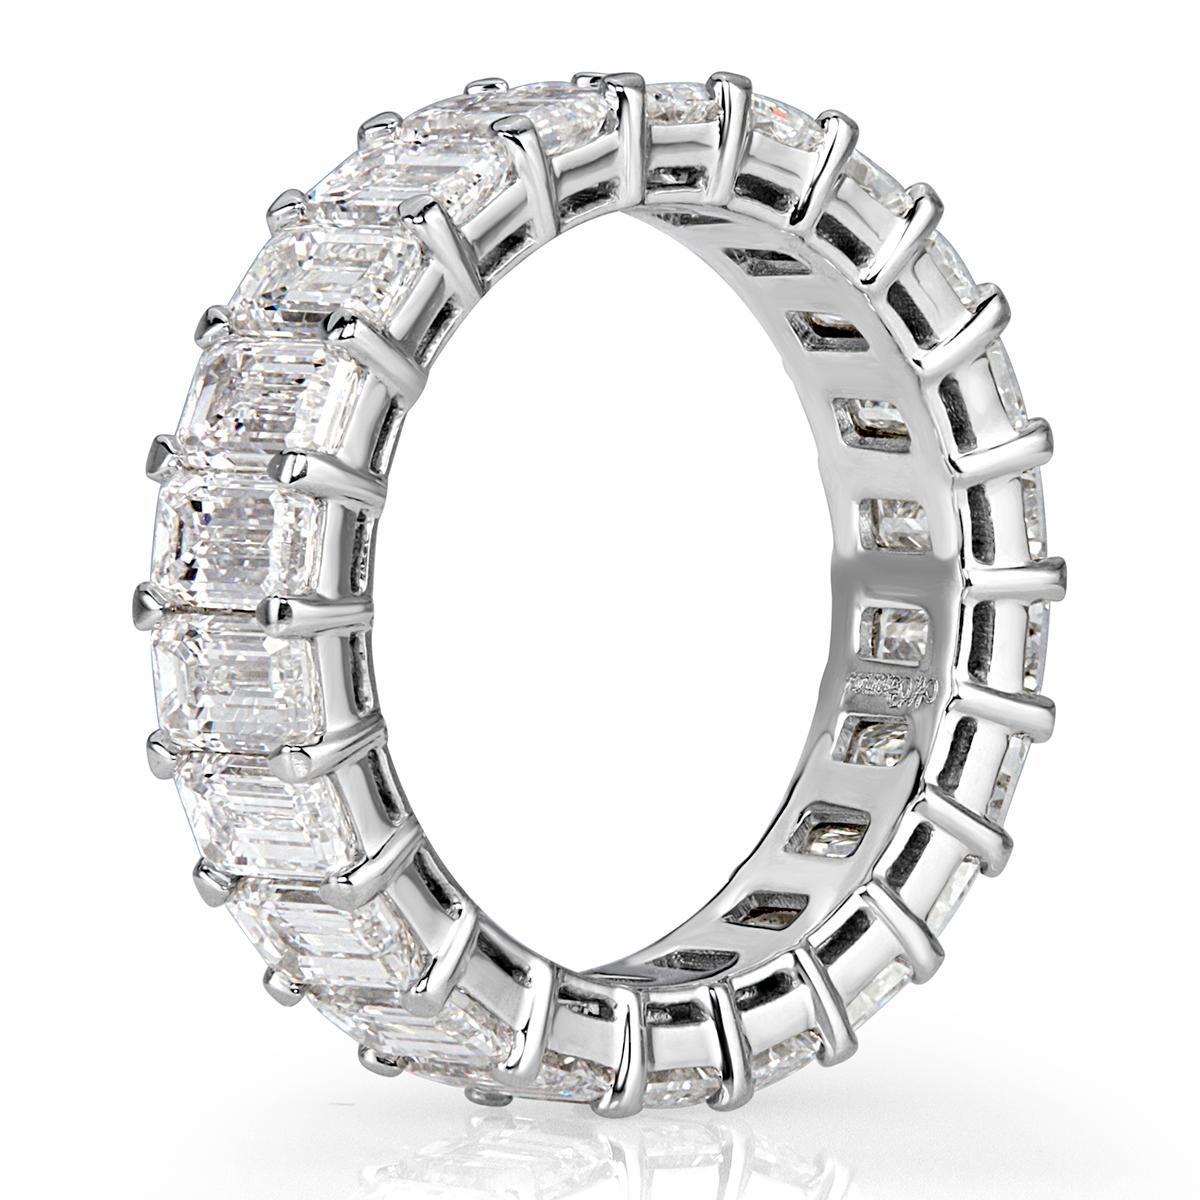 Handcrafted in high polish platinum, this superb diamond eternity band showcases 6.69ct of intensely bright emerald cut diamonds graded at E-F, VVS2-VS1. All eternity bands are shown in a size 6.5. We custom craft each eternity band and will create